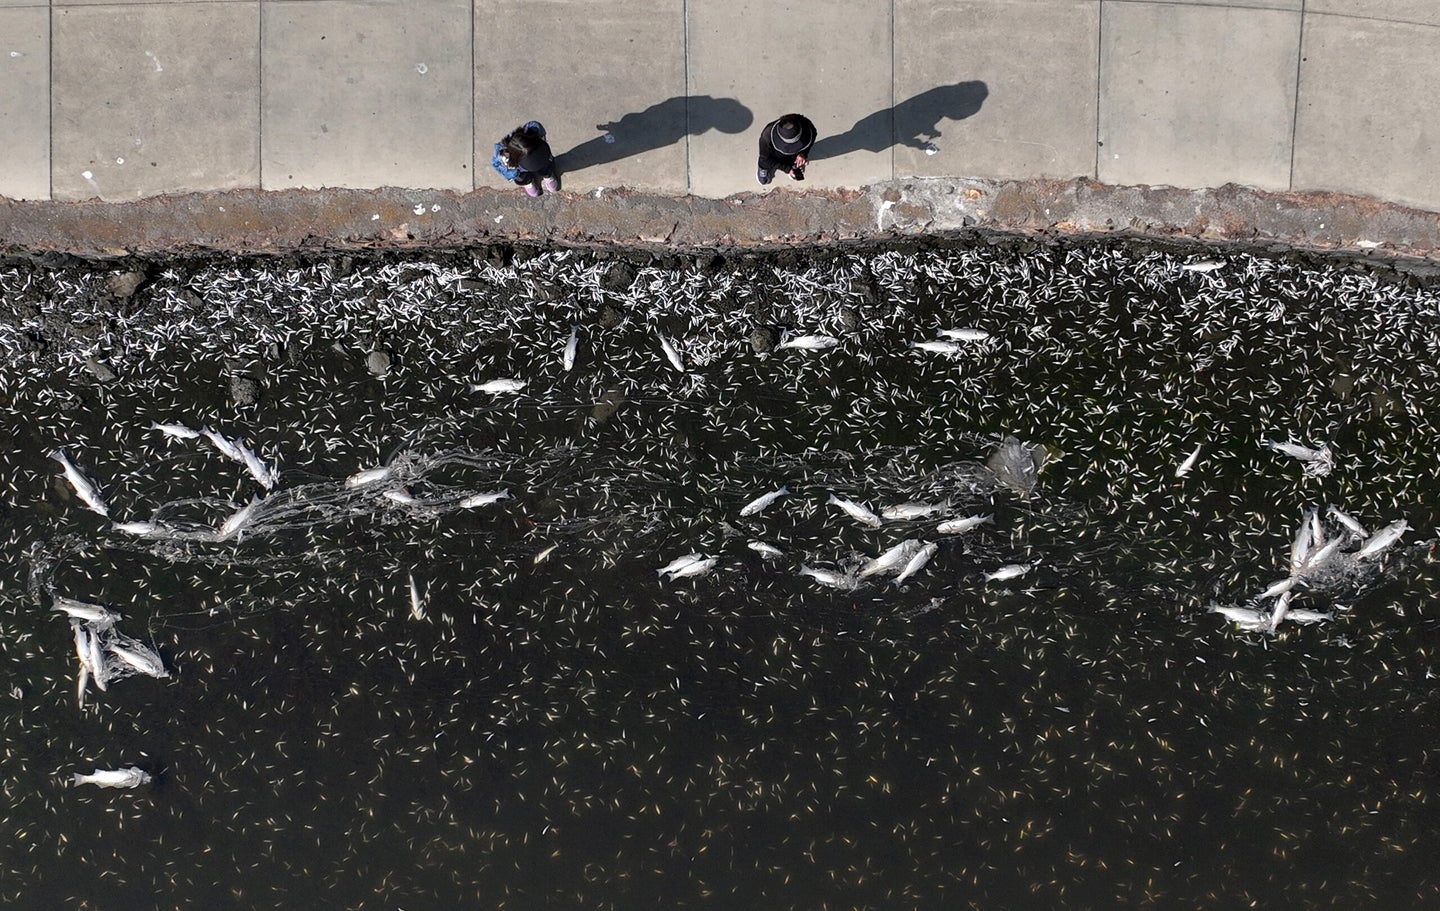 In an aerial view, hundreds of dead fish are seen floating in the waters